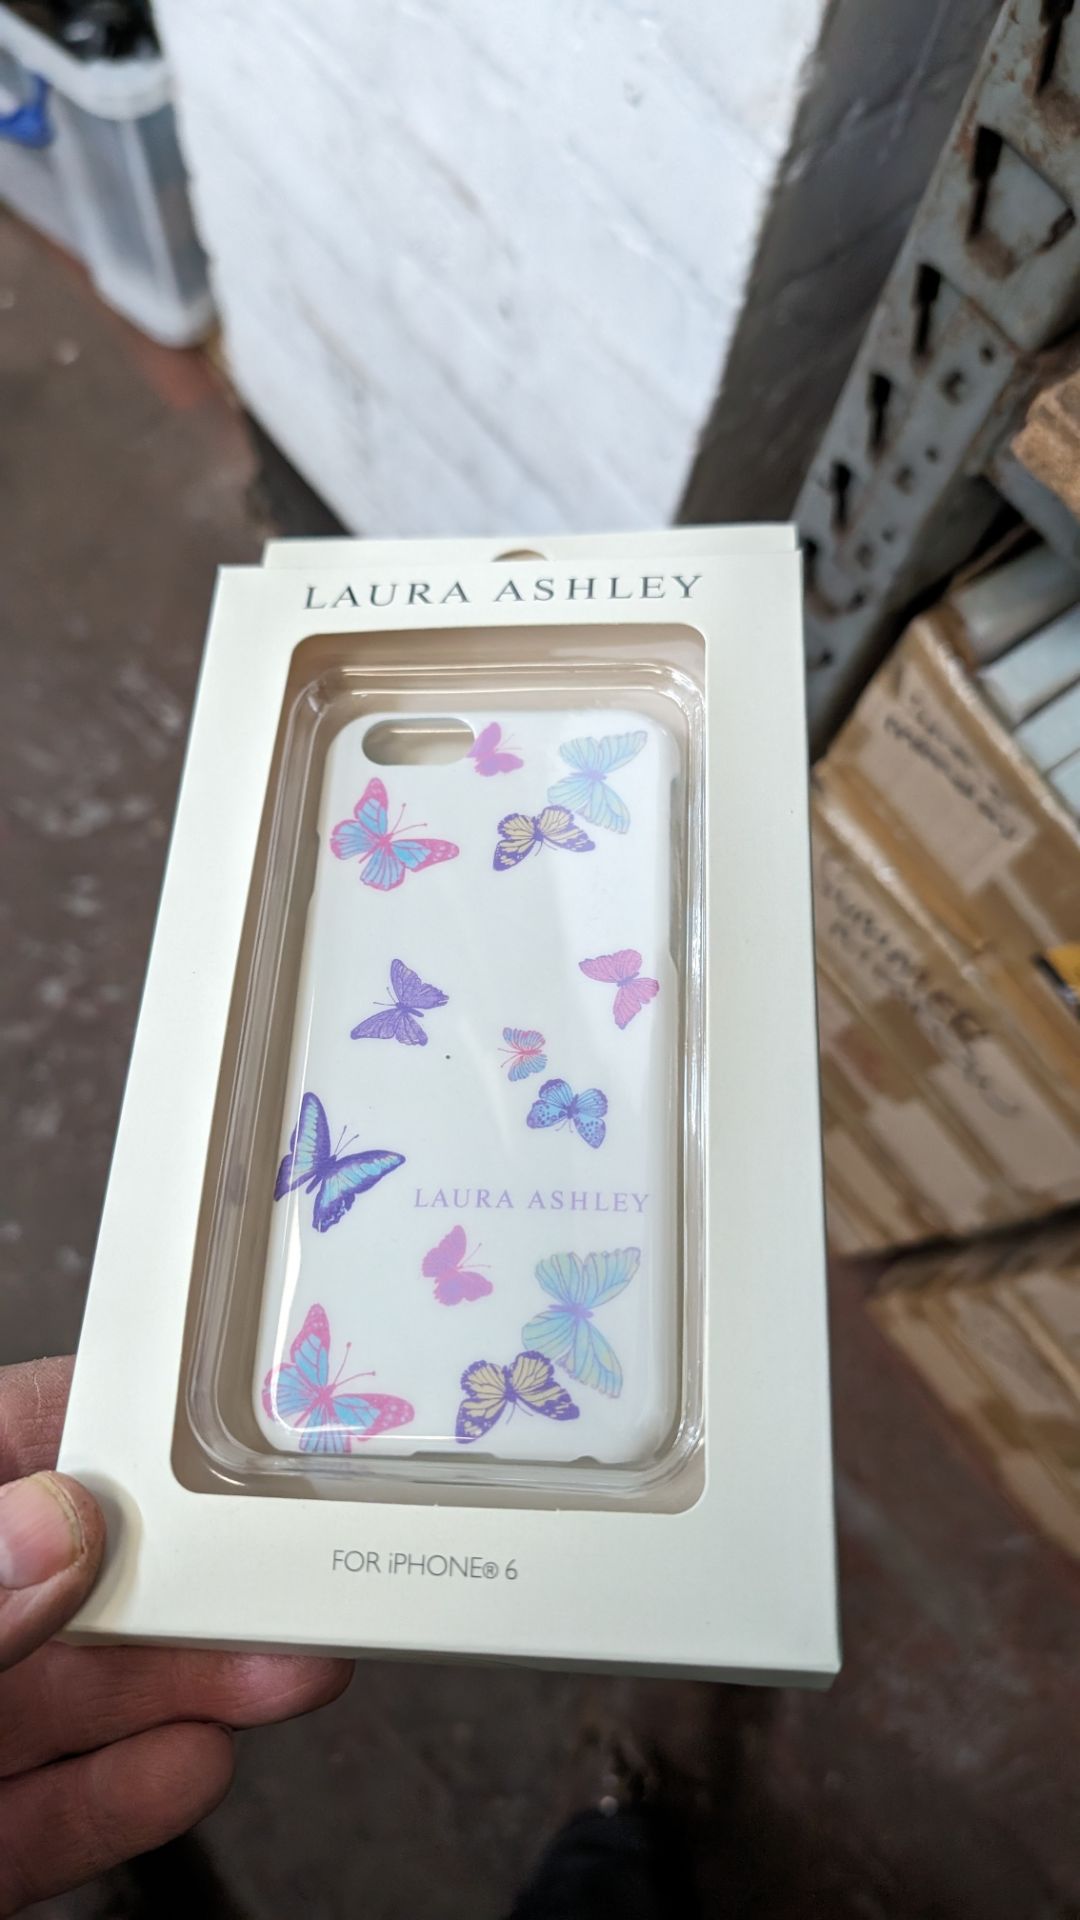 Large quantity of Laura Ashley iPhone covers/cases for iPhone 6 in several different designs - 10 la - Image 3 of 4